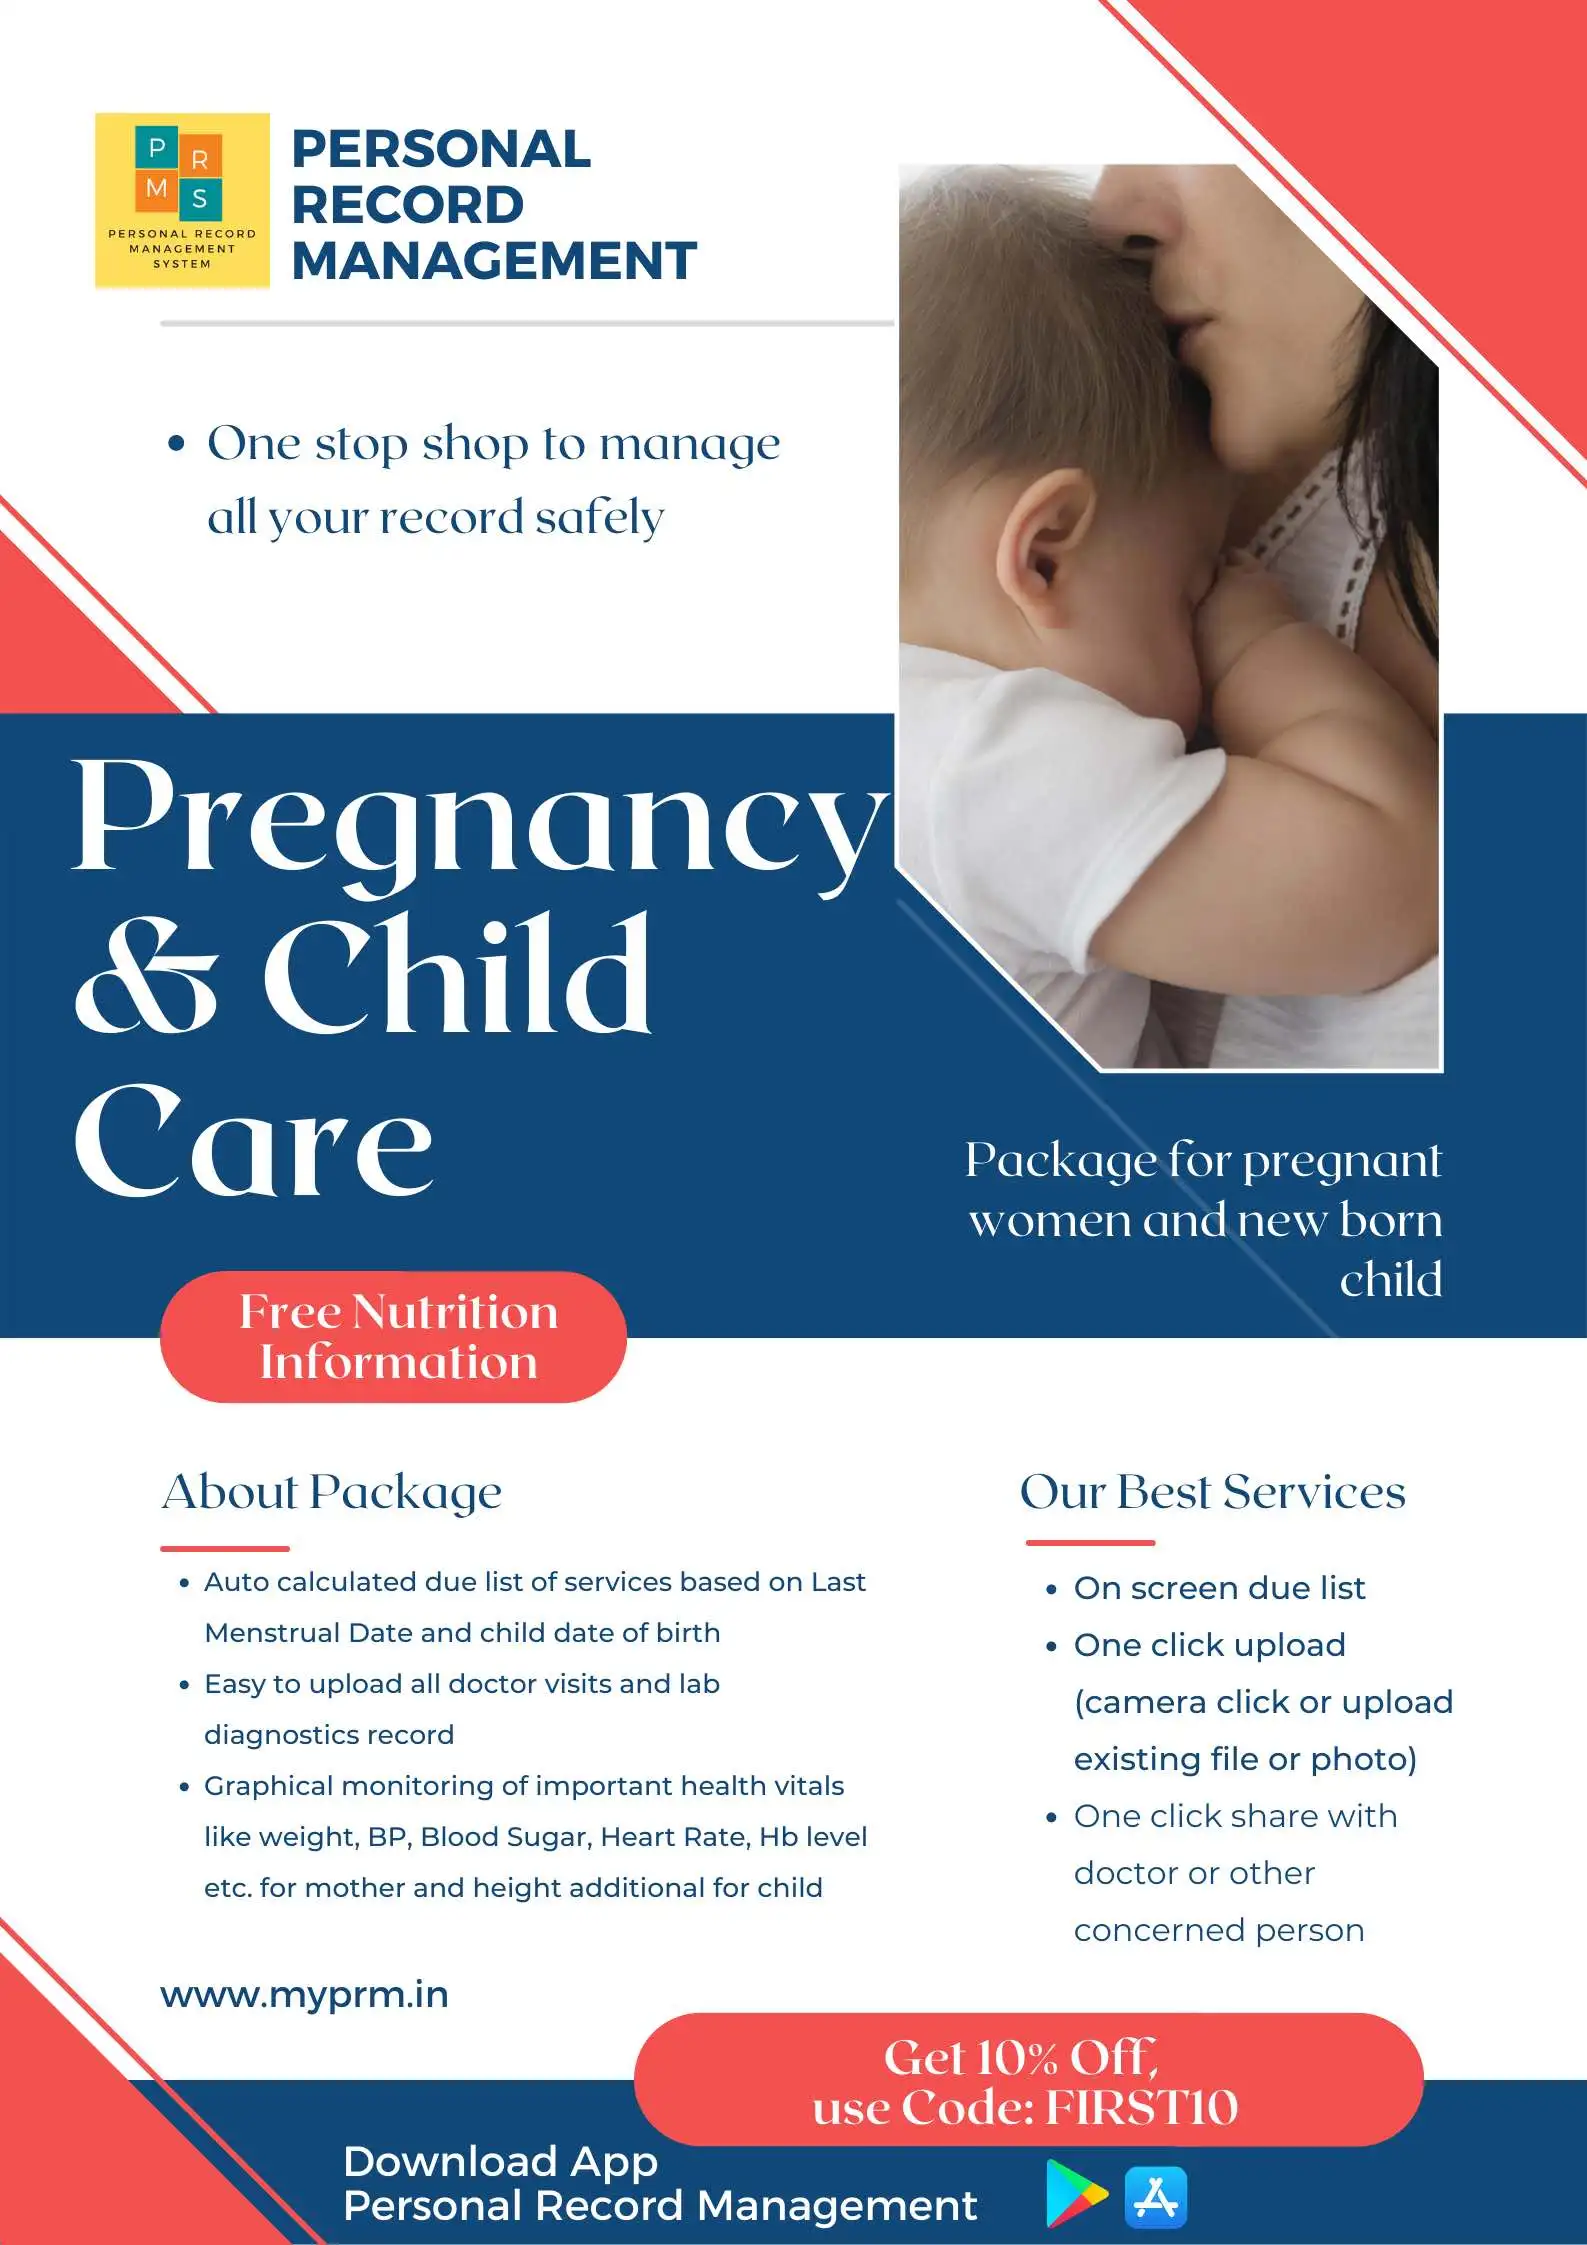 Pregnant Women and Child Care